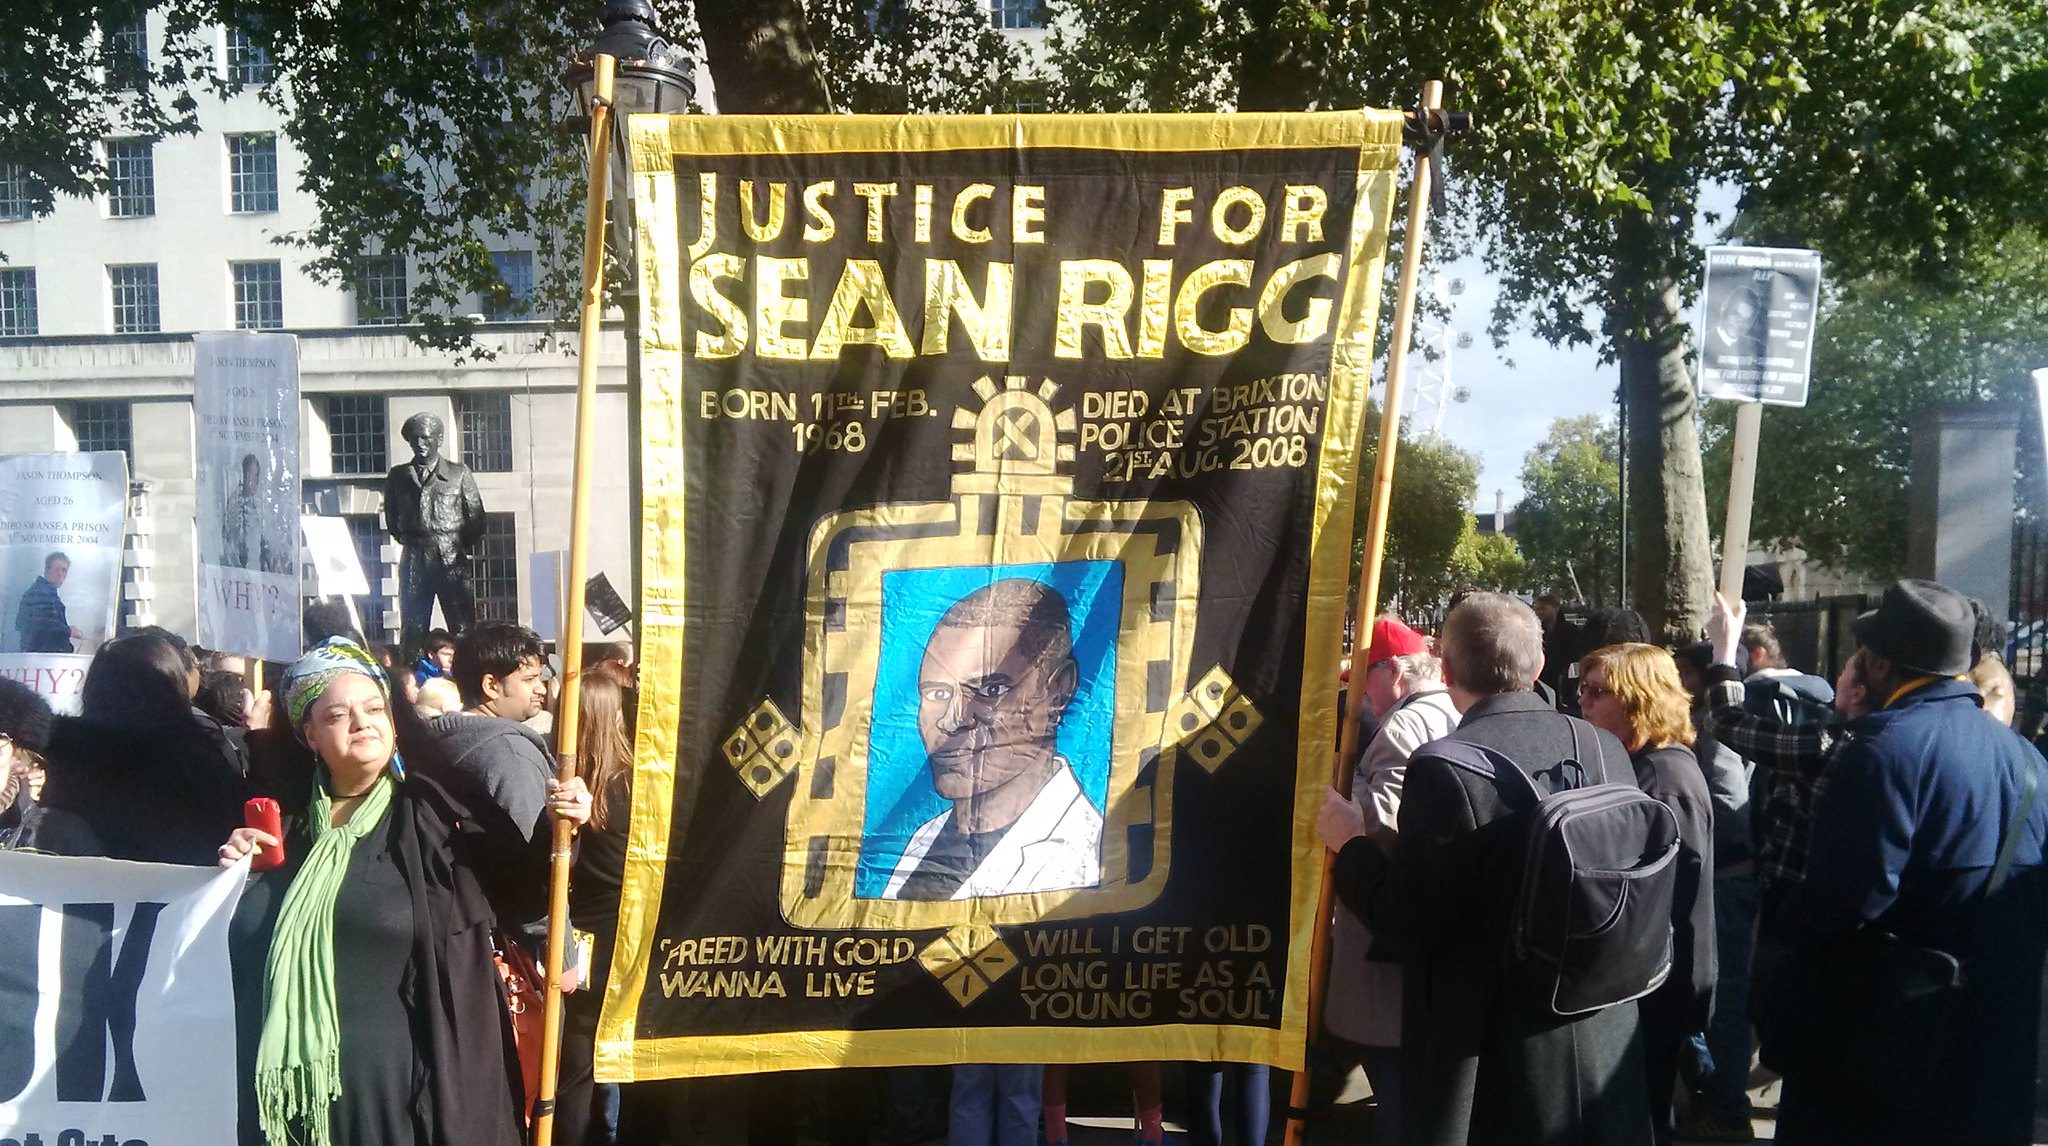 Justice for Sean Rigg banner at the UFFC rally 2014